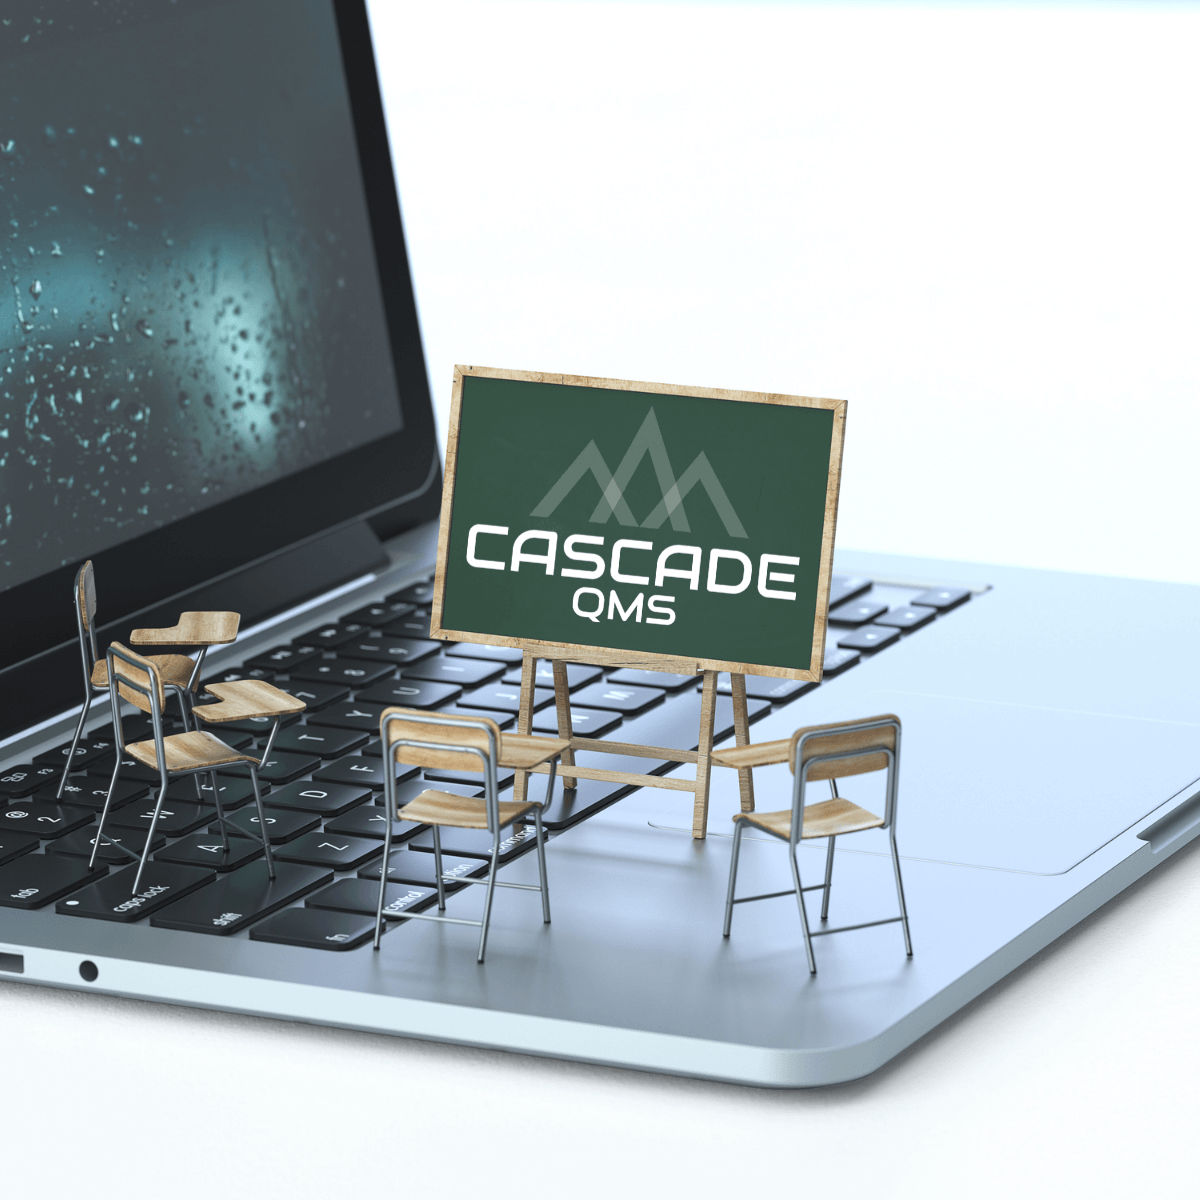 Classroom on laptop with Cascade QMS logo